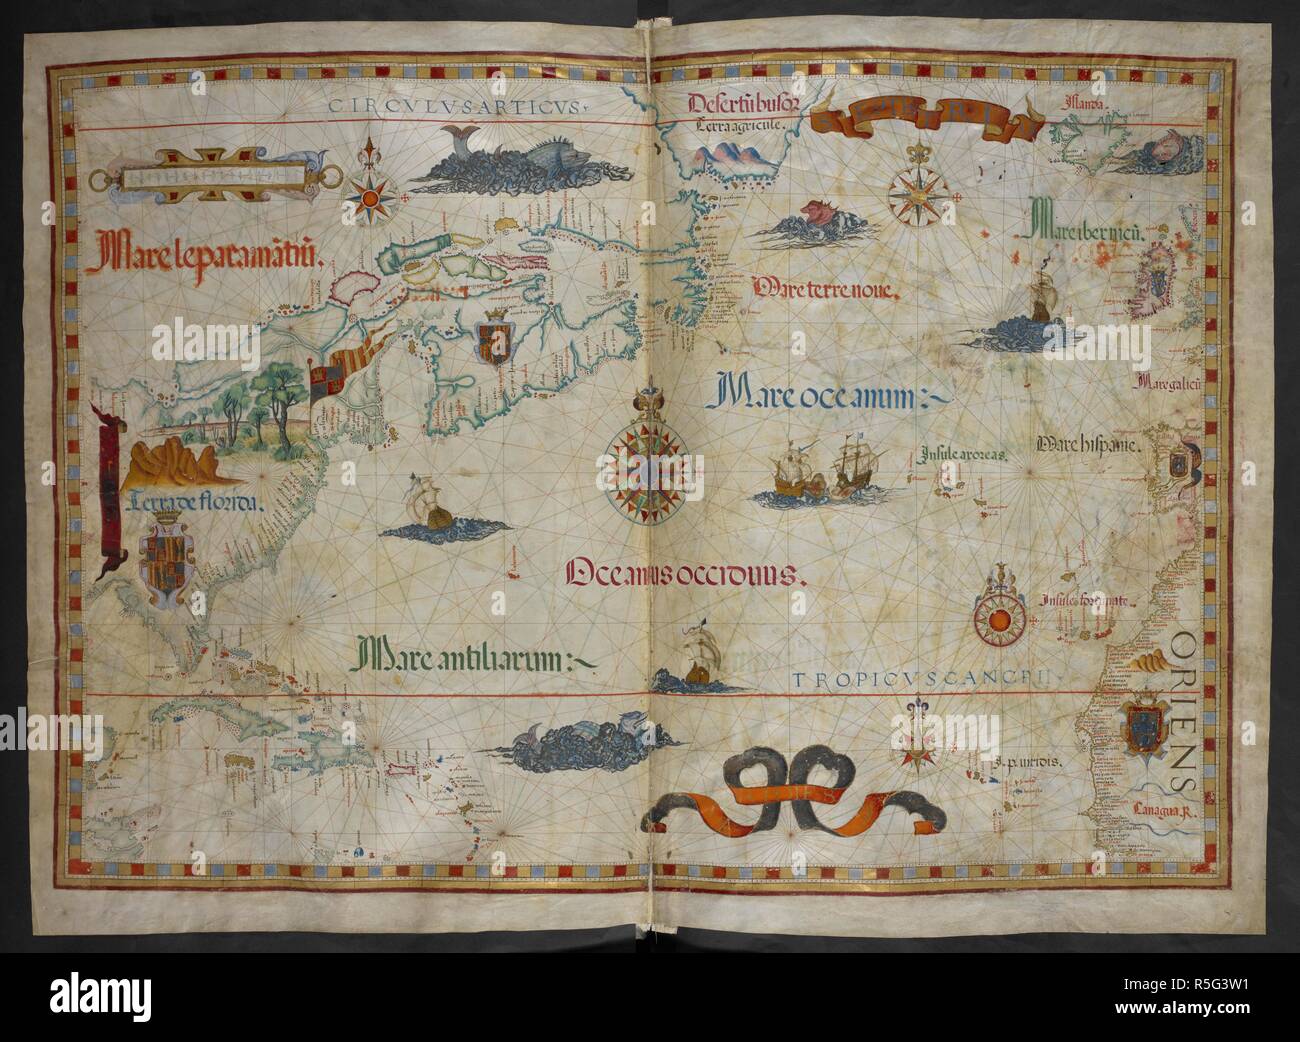 Chart of the North Atlantic Ocean from Florida on the west to Iceland, Ireland and the Iberian peninsula on the east. Queen Mary Atlas. 1558. Source: Add. 5415 A, ff.19v-20. Author: Homem, Diego. Stock Photo